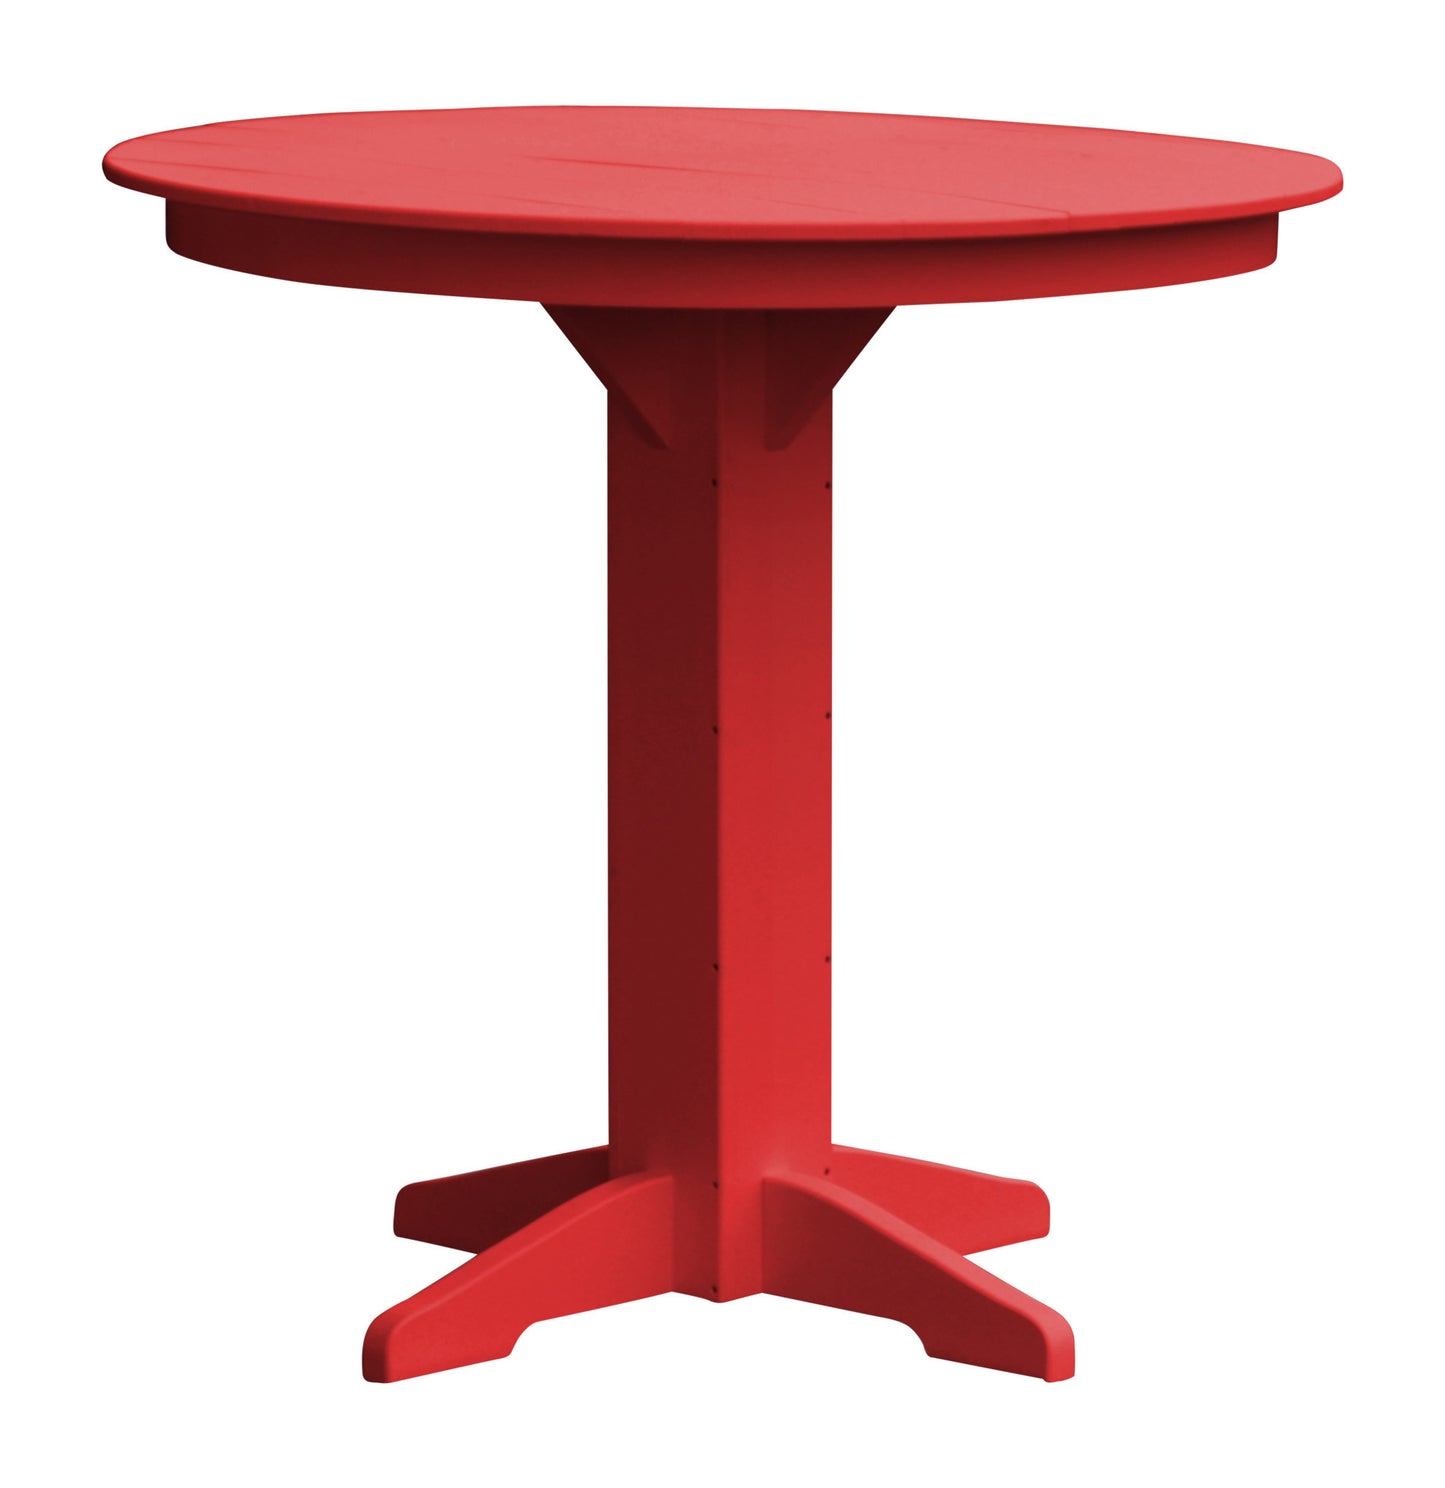 A&L Furniture Recycled Plastic 44" Round Bar Table - Bright Red